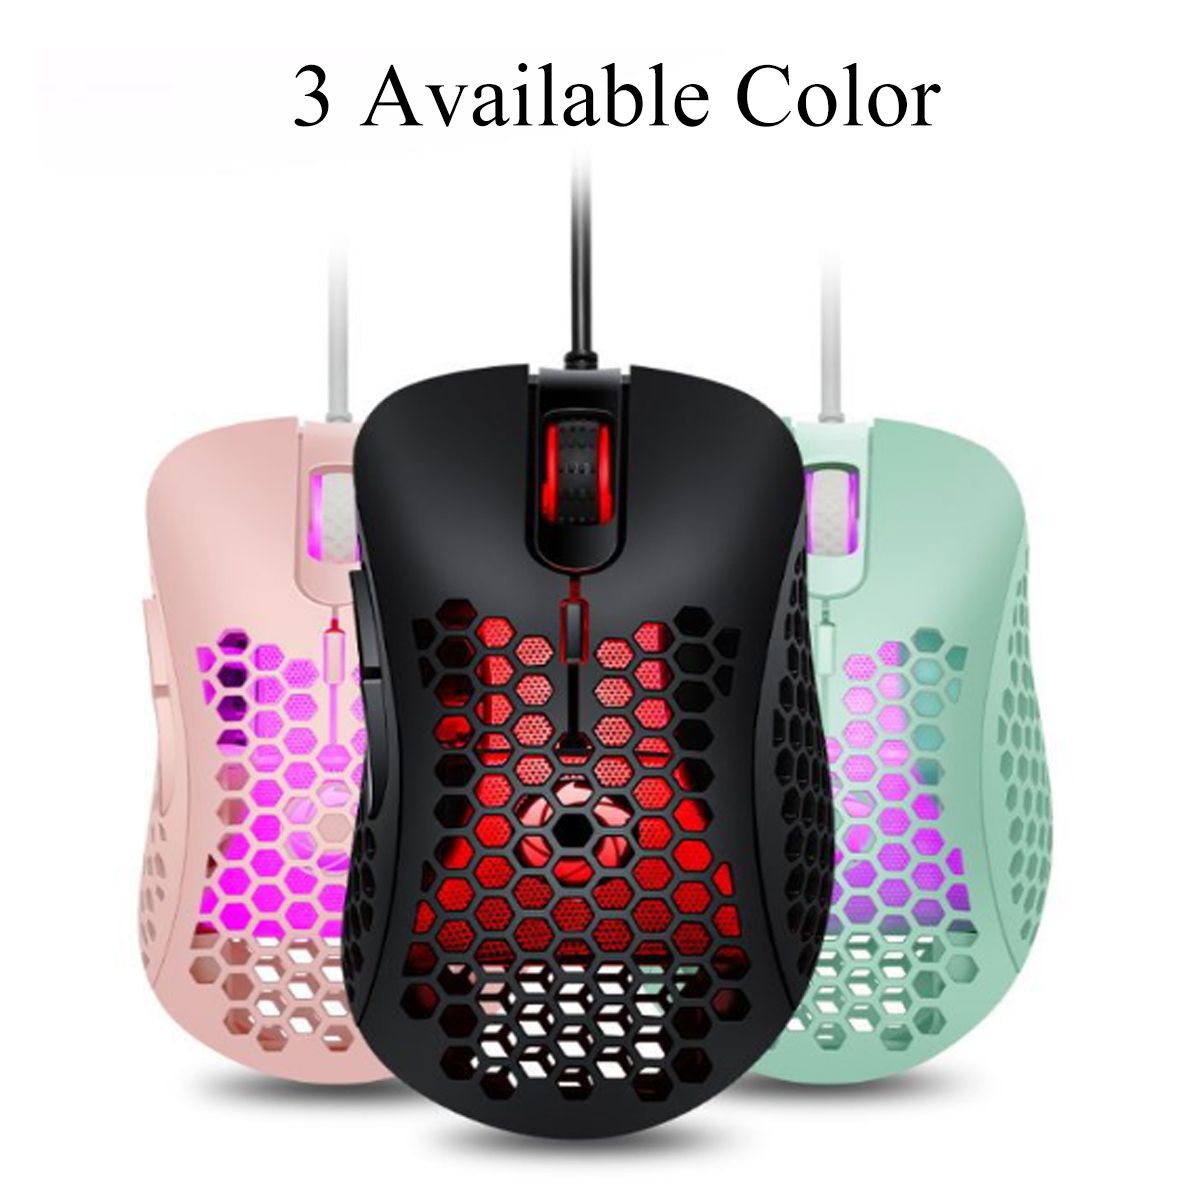 Light-Magic-V18-Wired-Game-Mouse-Breathing-Colorful-Hollow-Honeycomb-3200DPI-Gaming-Mouse-USB-Wired--1745507